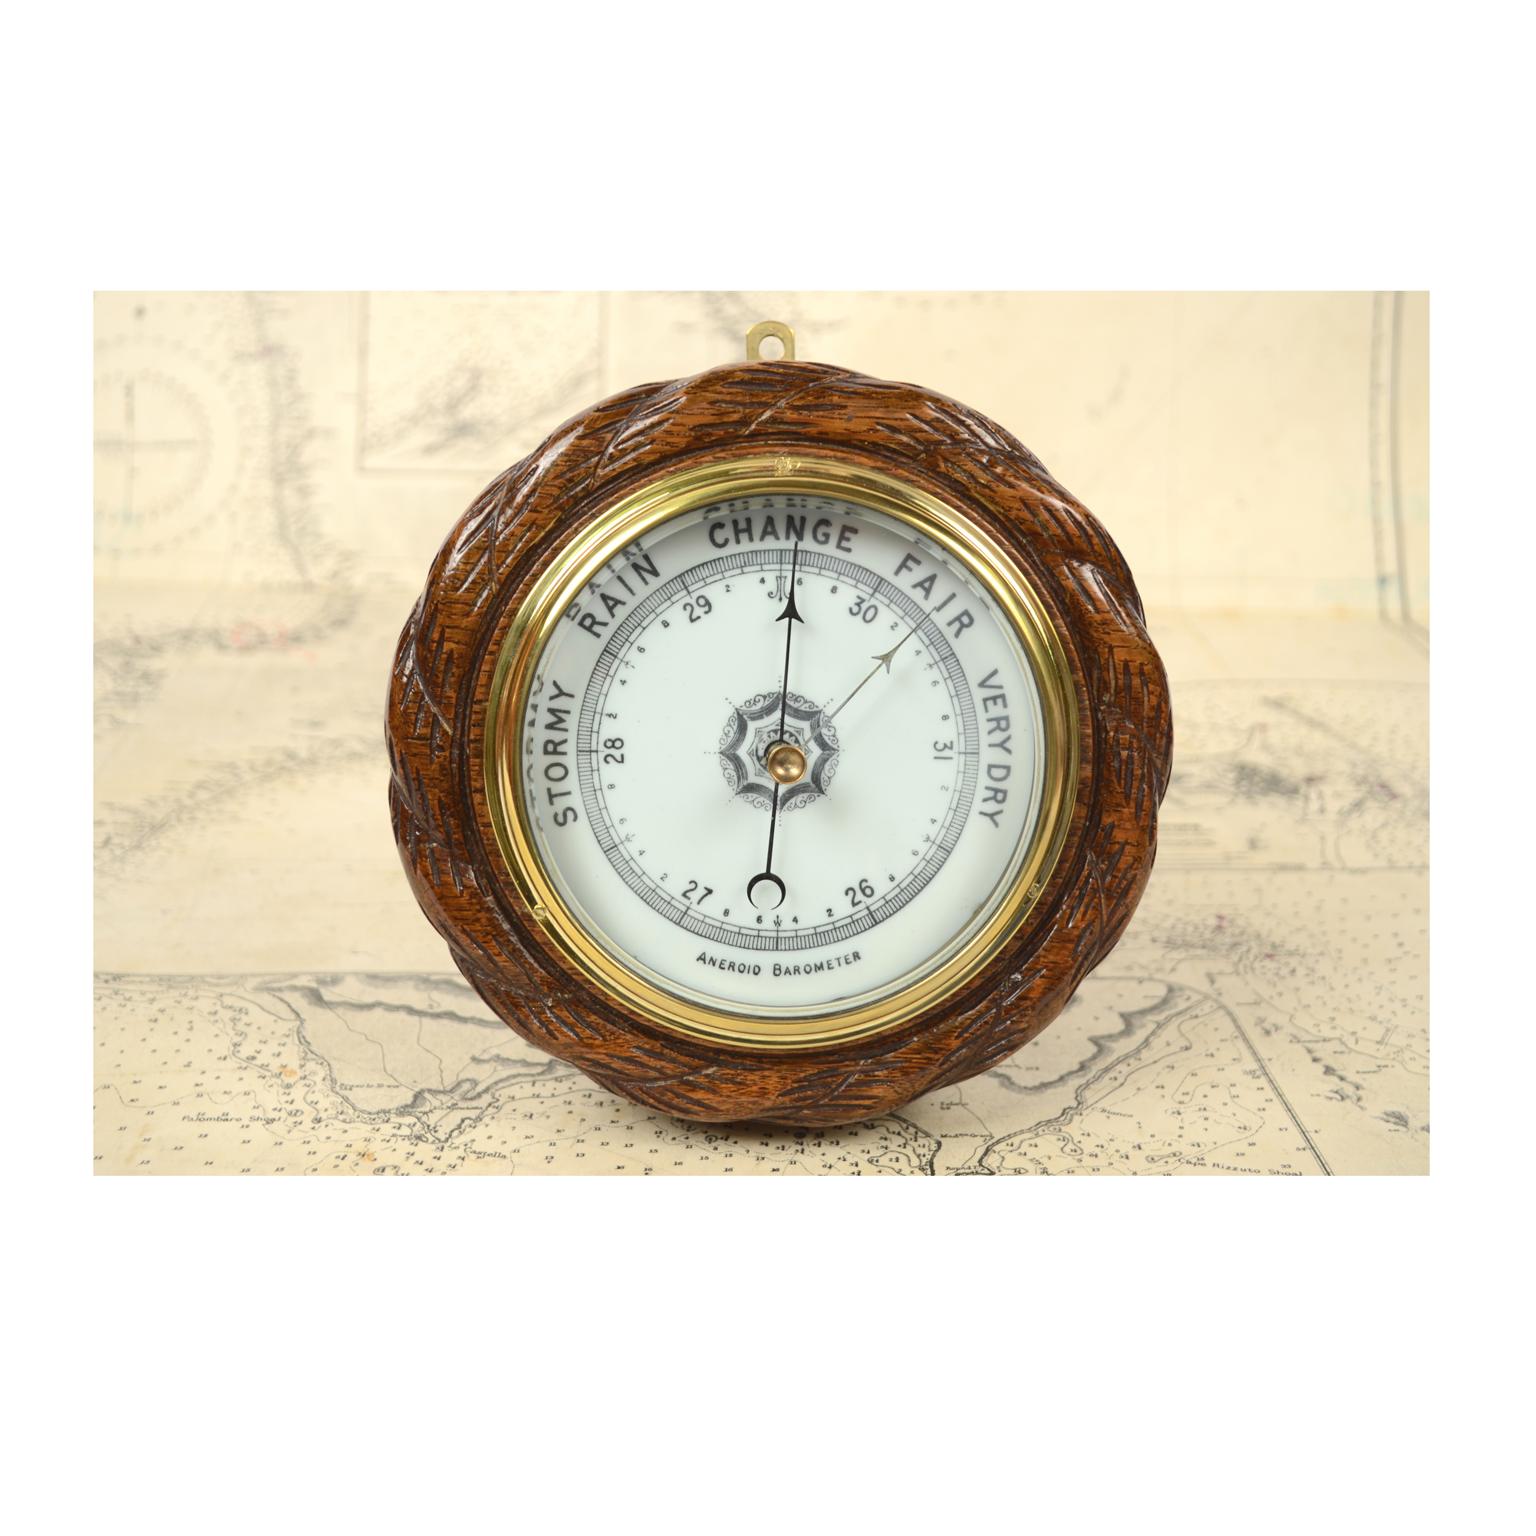 Antique English aneroid barometer made in the late 1800s in oakwood carved like a rope, brass and glass. Very good condition. Working. Diameter 17 cm, thickness cm 5.5.
Shipping in insured by Lloyd's London and the gift box is free (look at the last